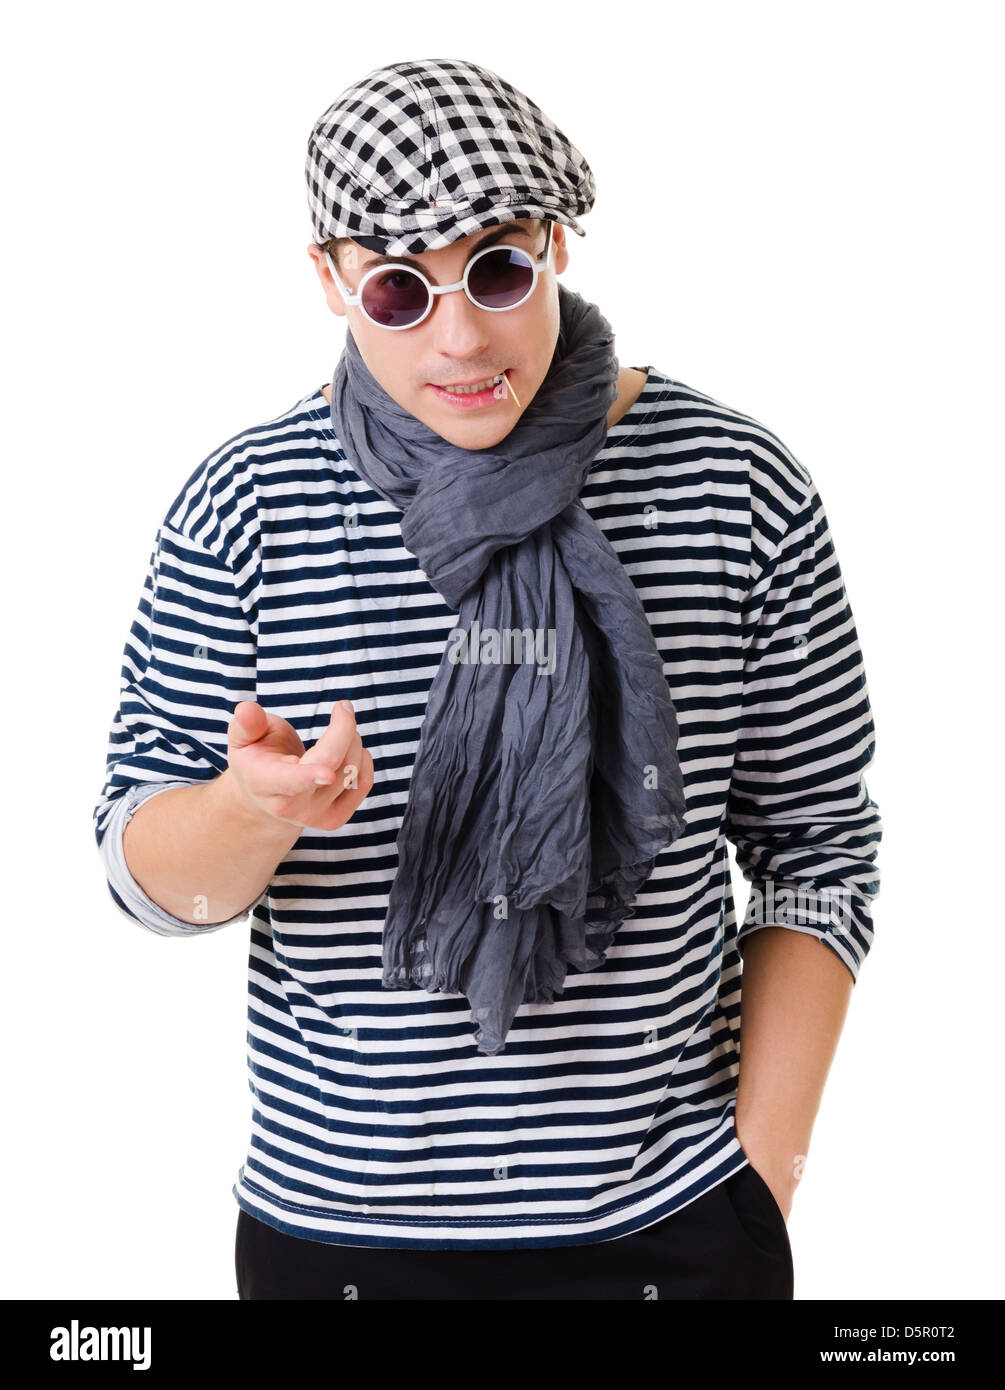 Young suspicious looking stylish twister man in striped clothes isolated on white background Stock Photo